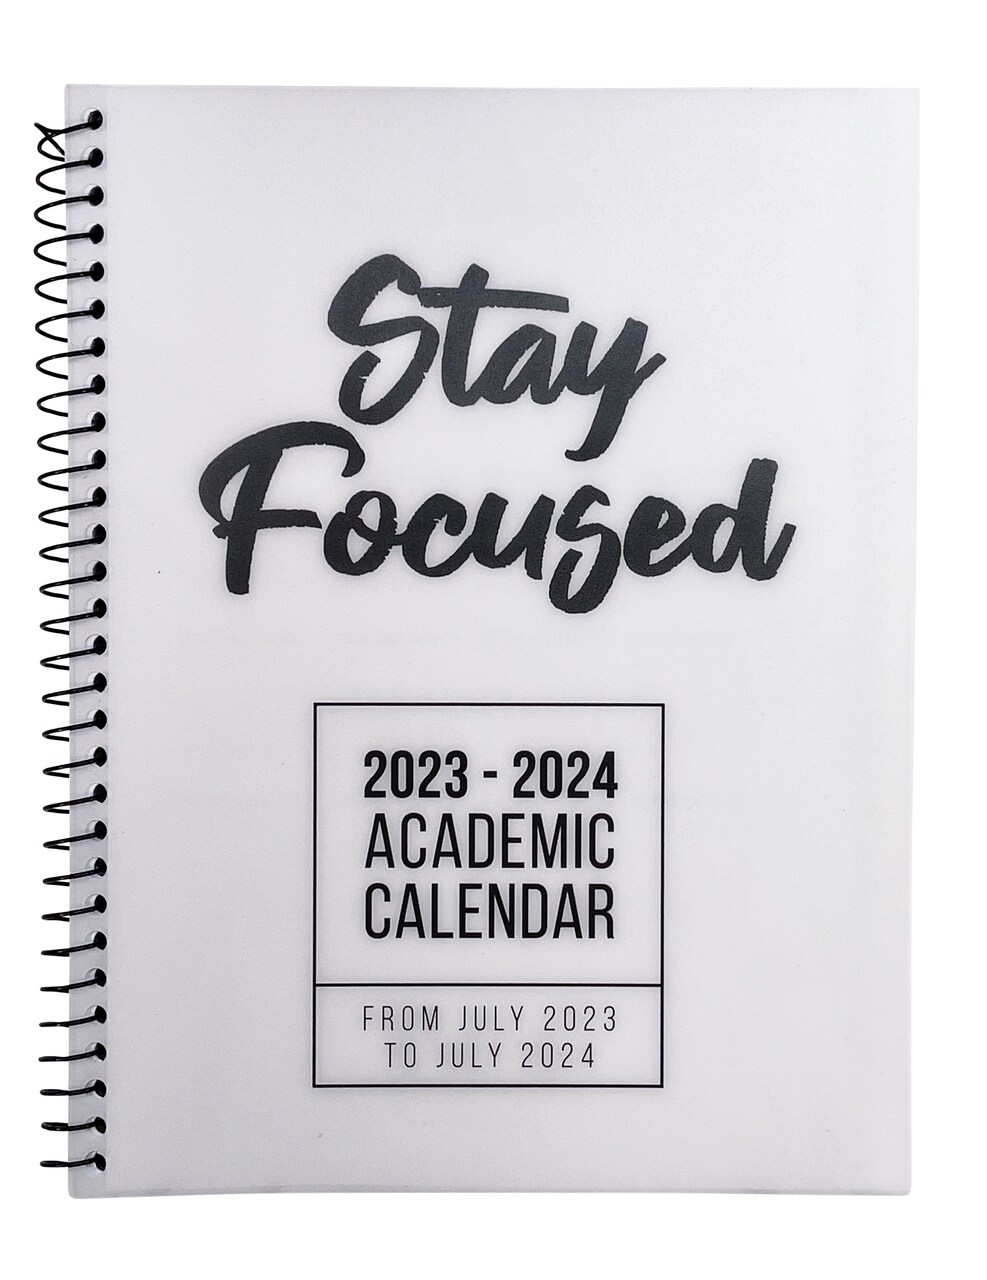 RE-FOCUS THE CREATIVE OFFICE, 2023-2024 Academic Calendar, Monthly and Weekly Views with Time Slots, To-Do List